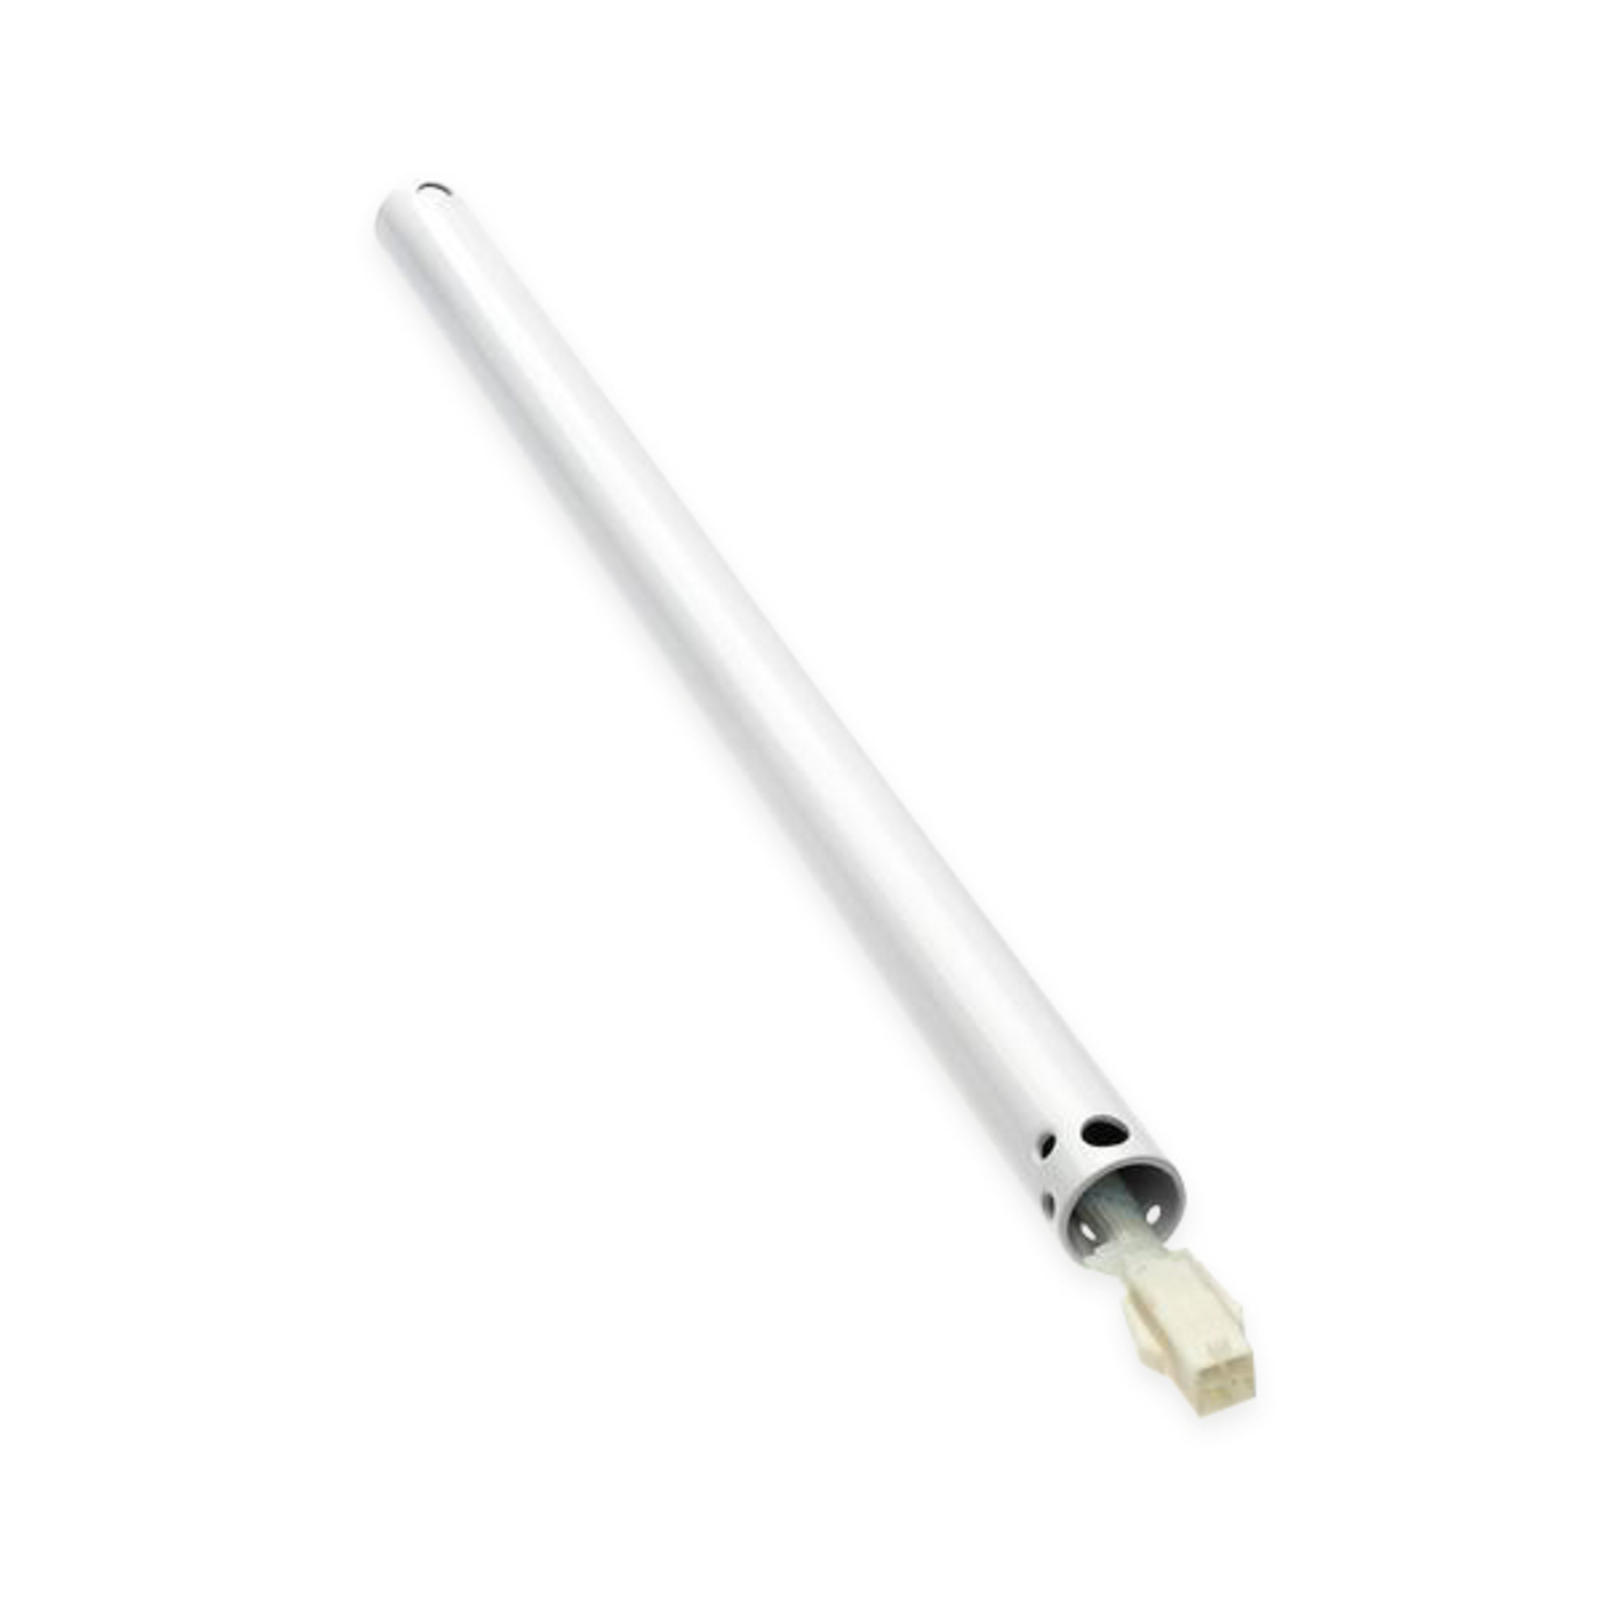 46 cm extension rod in white